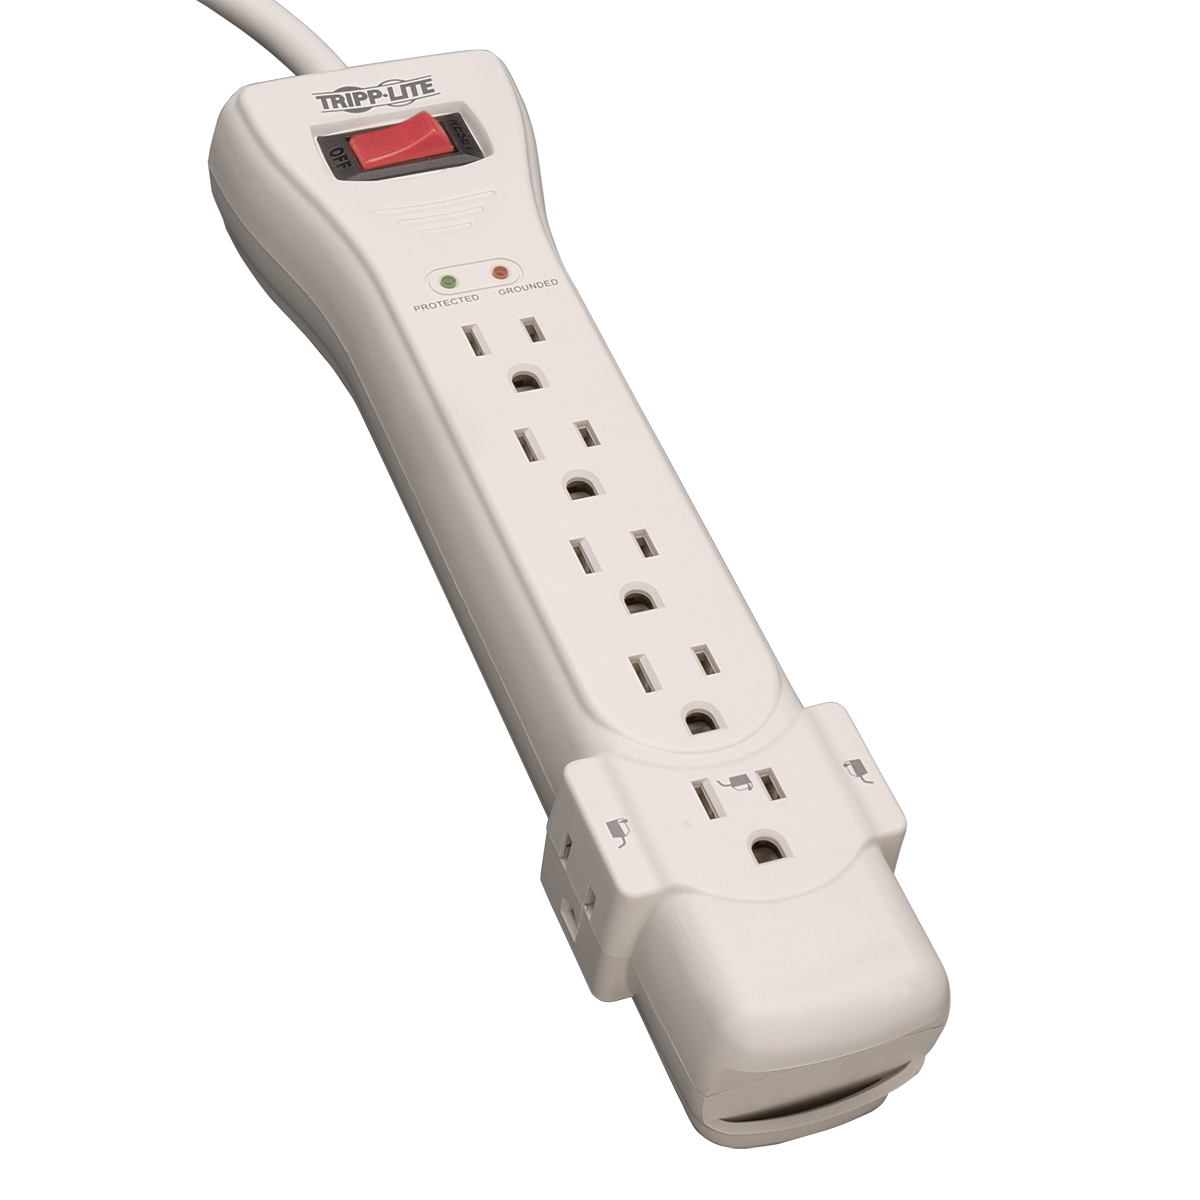 Tripp Lite SUPER7 Protect It! surge protector 7 AC outlet(s) 120 V 82.7" (2.1 m) White